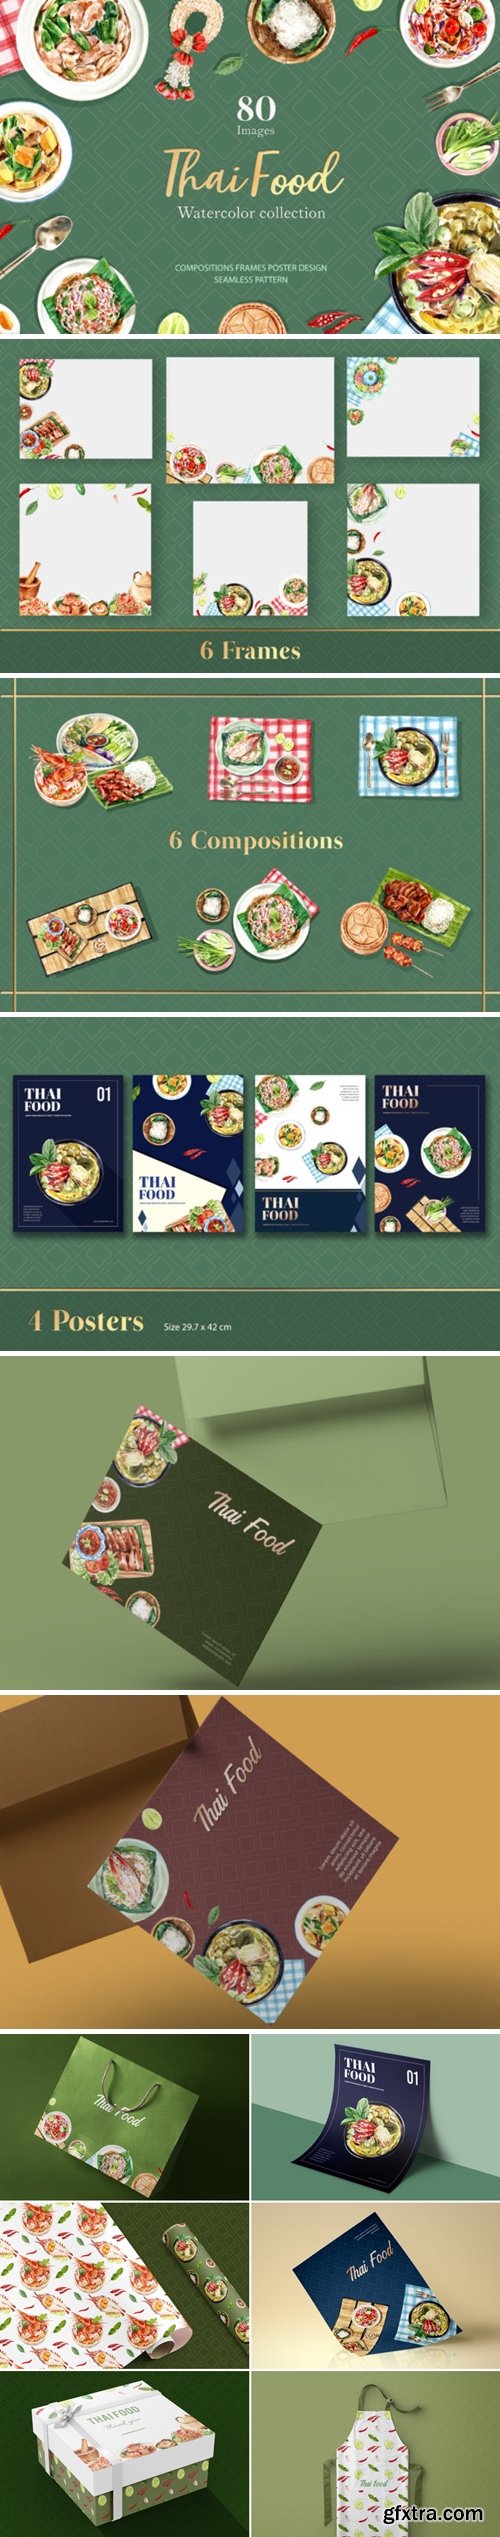 Thai Food Dishes Watercolor 6556113